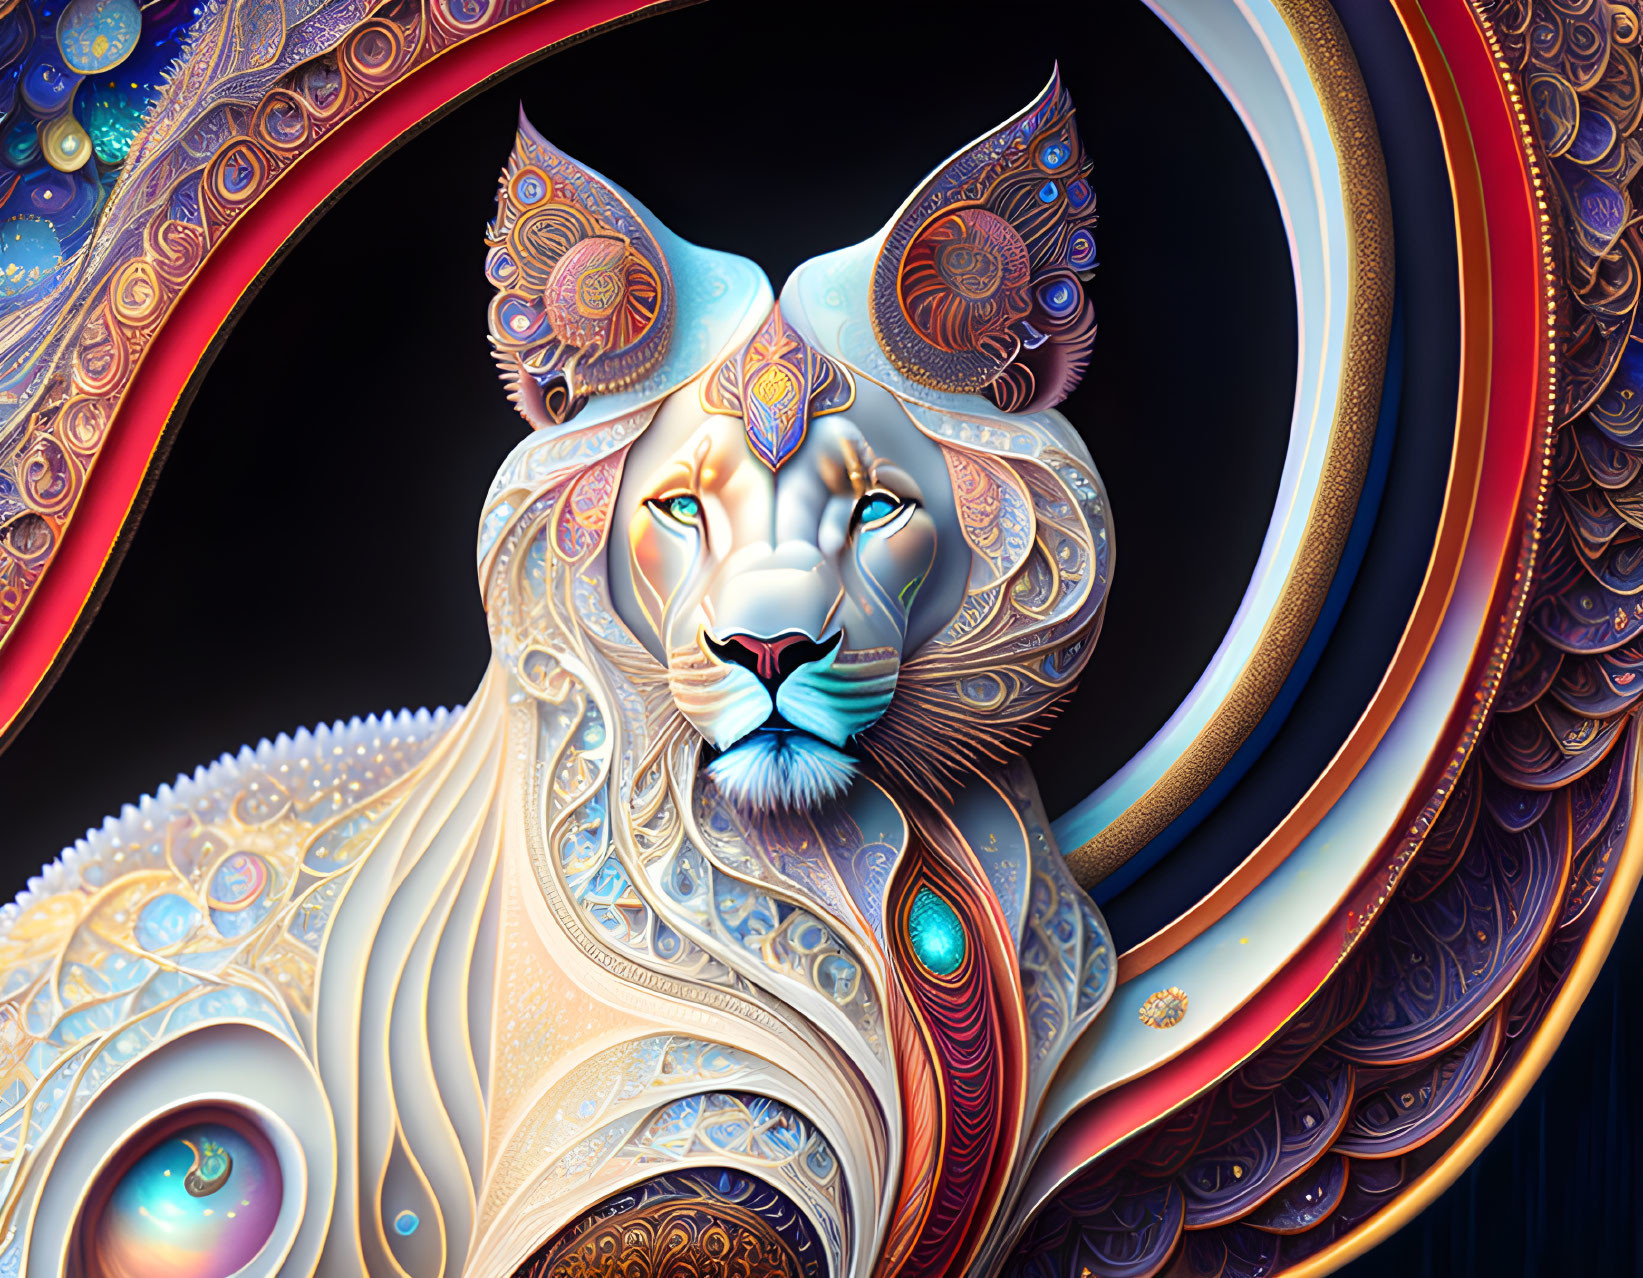 Colorful Stylized Lion Artwork with Ornamental Details